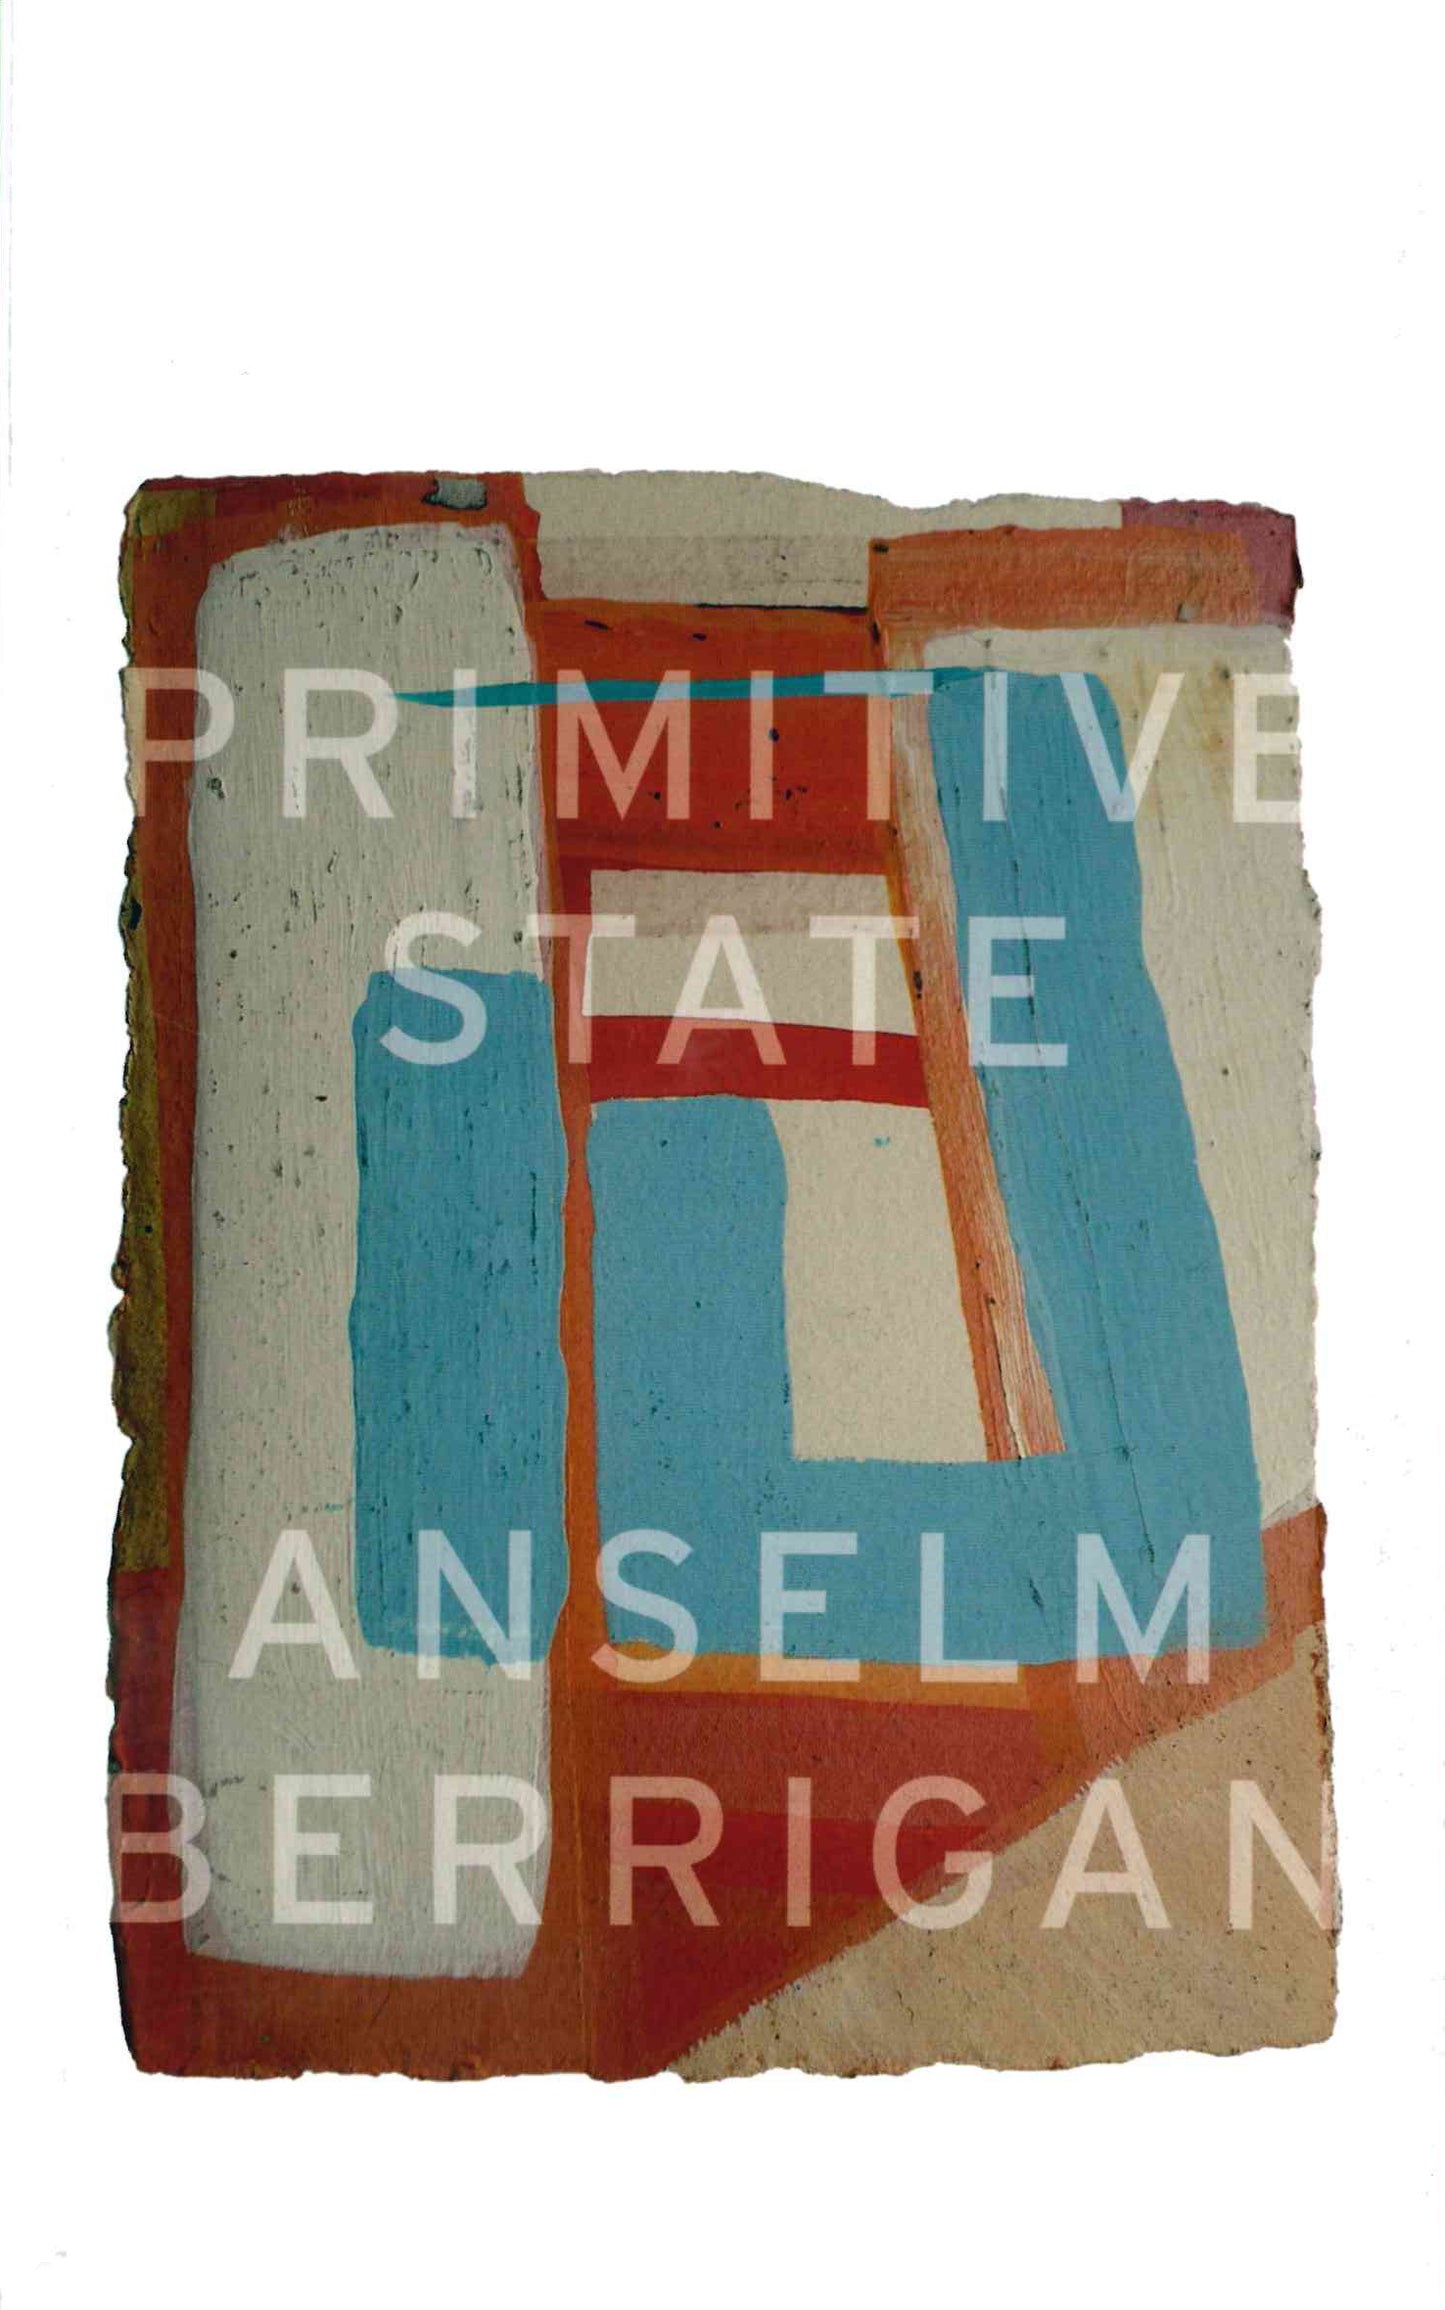 Primitive State, by Anselm Berrigan